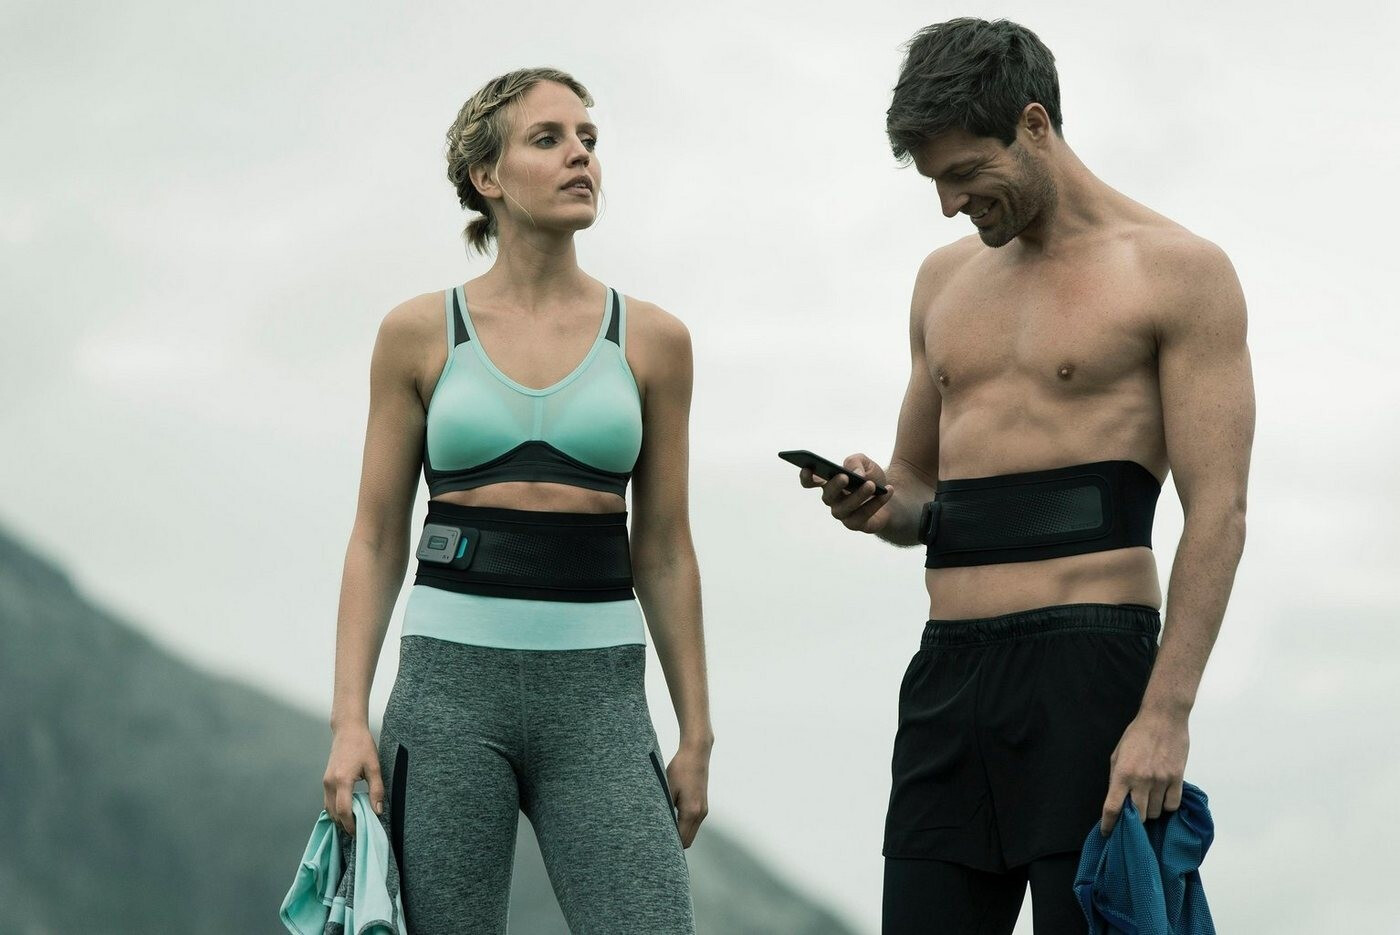 Buy Slendertone Connect Abs from £299.00 (Today) – Best Deals on